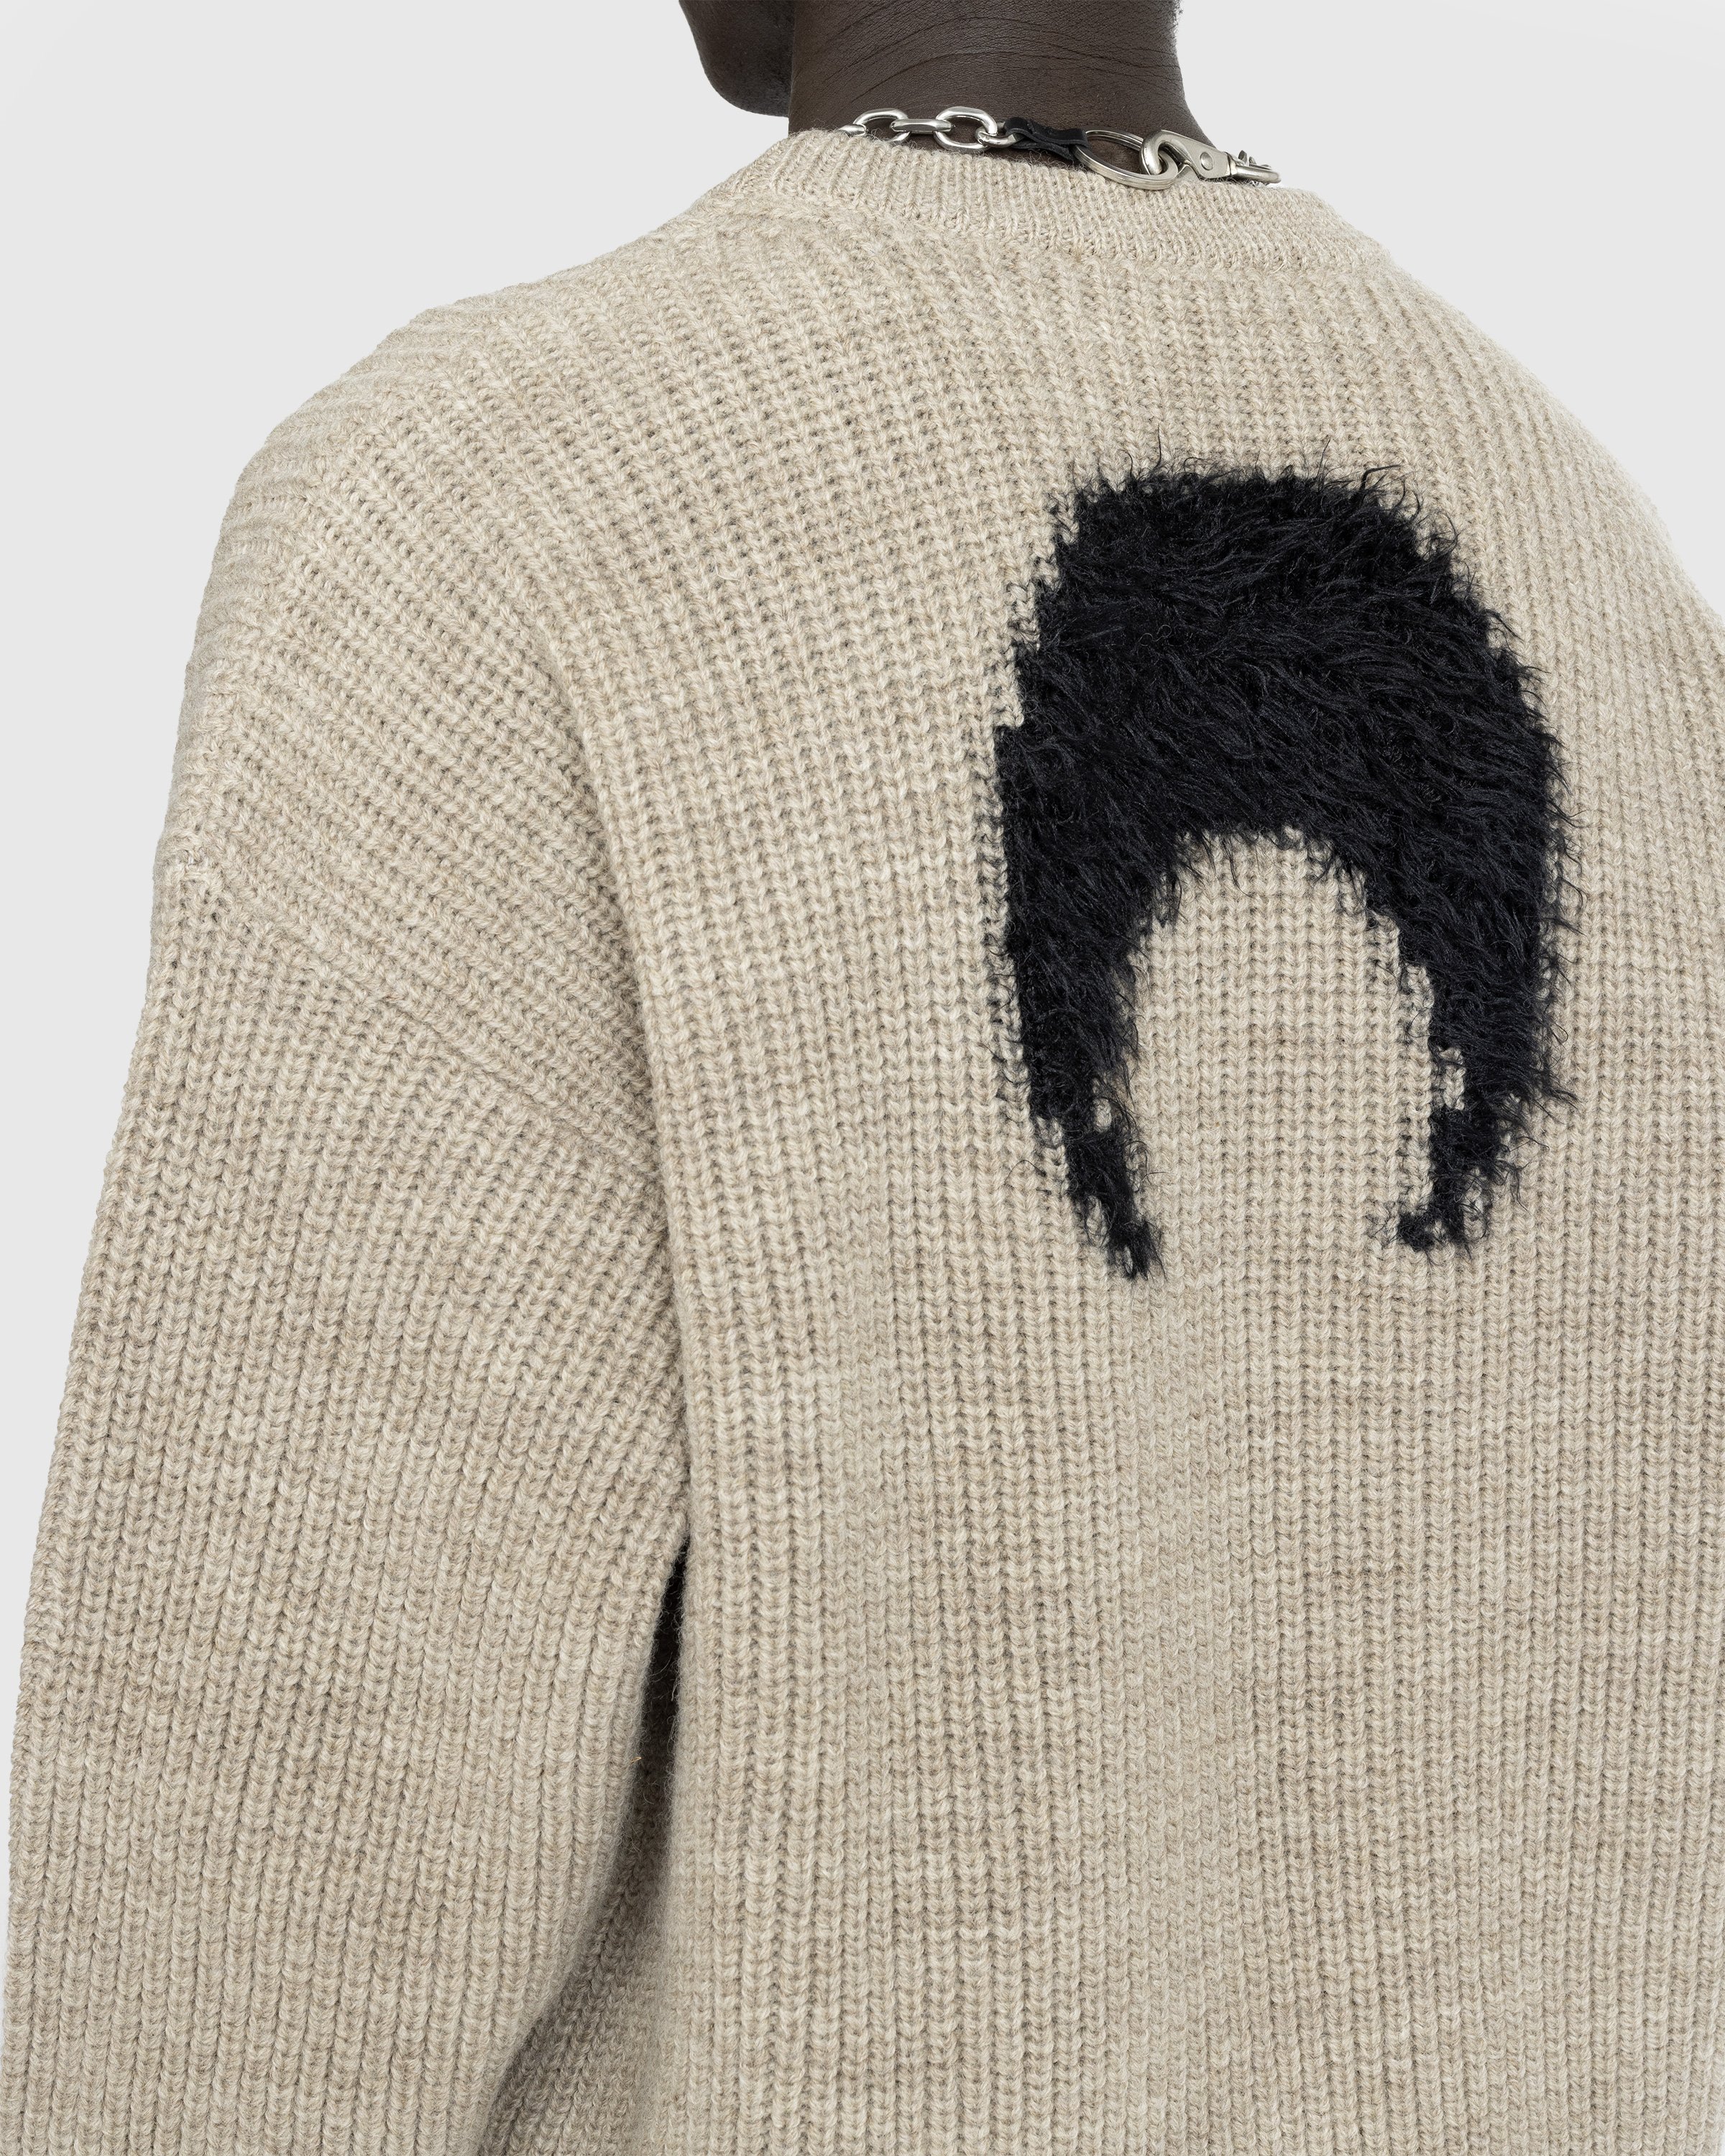 Marine Serre - Wool and Fluffy Knit Crewneck Pullover Beige - Clothing - undefined - Image 6